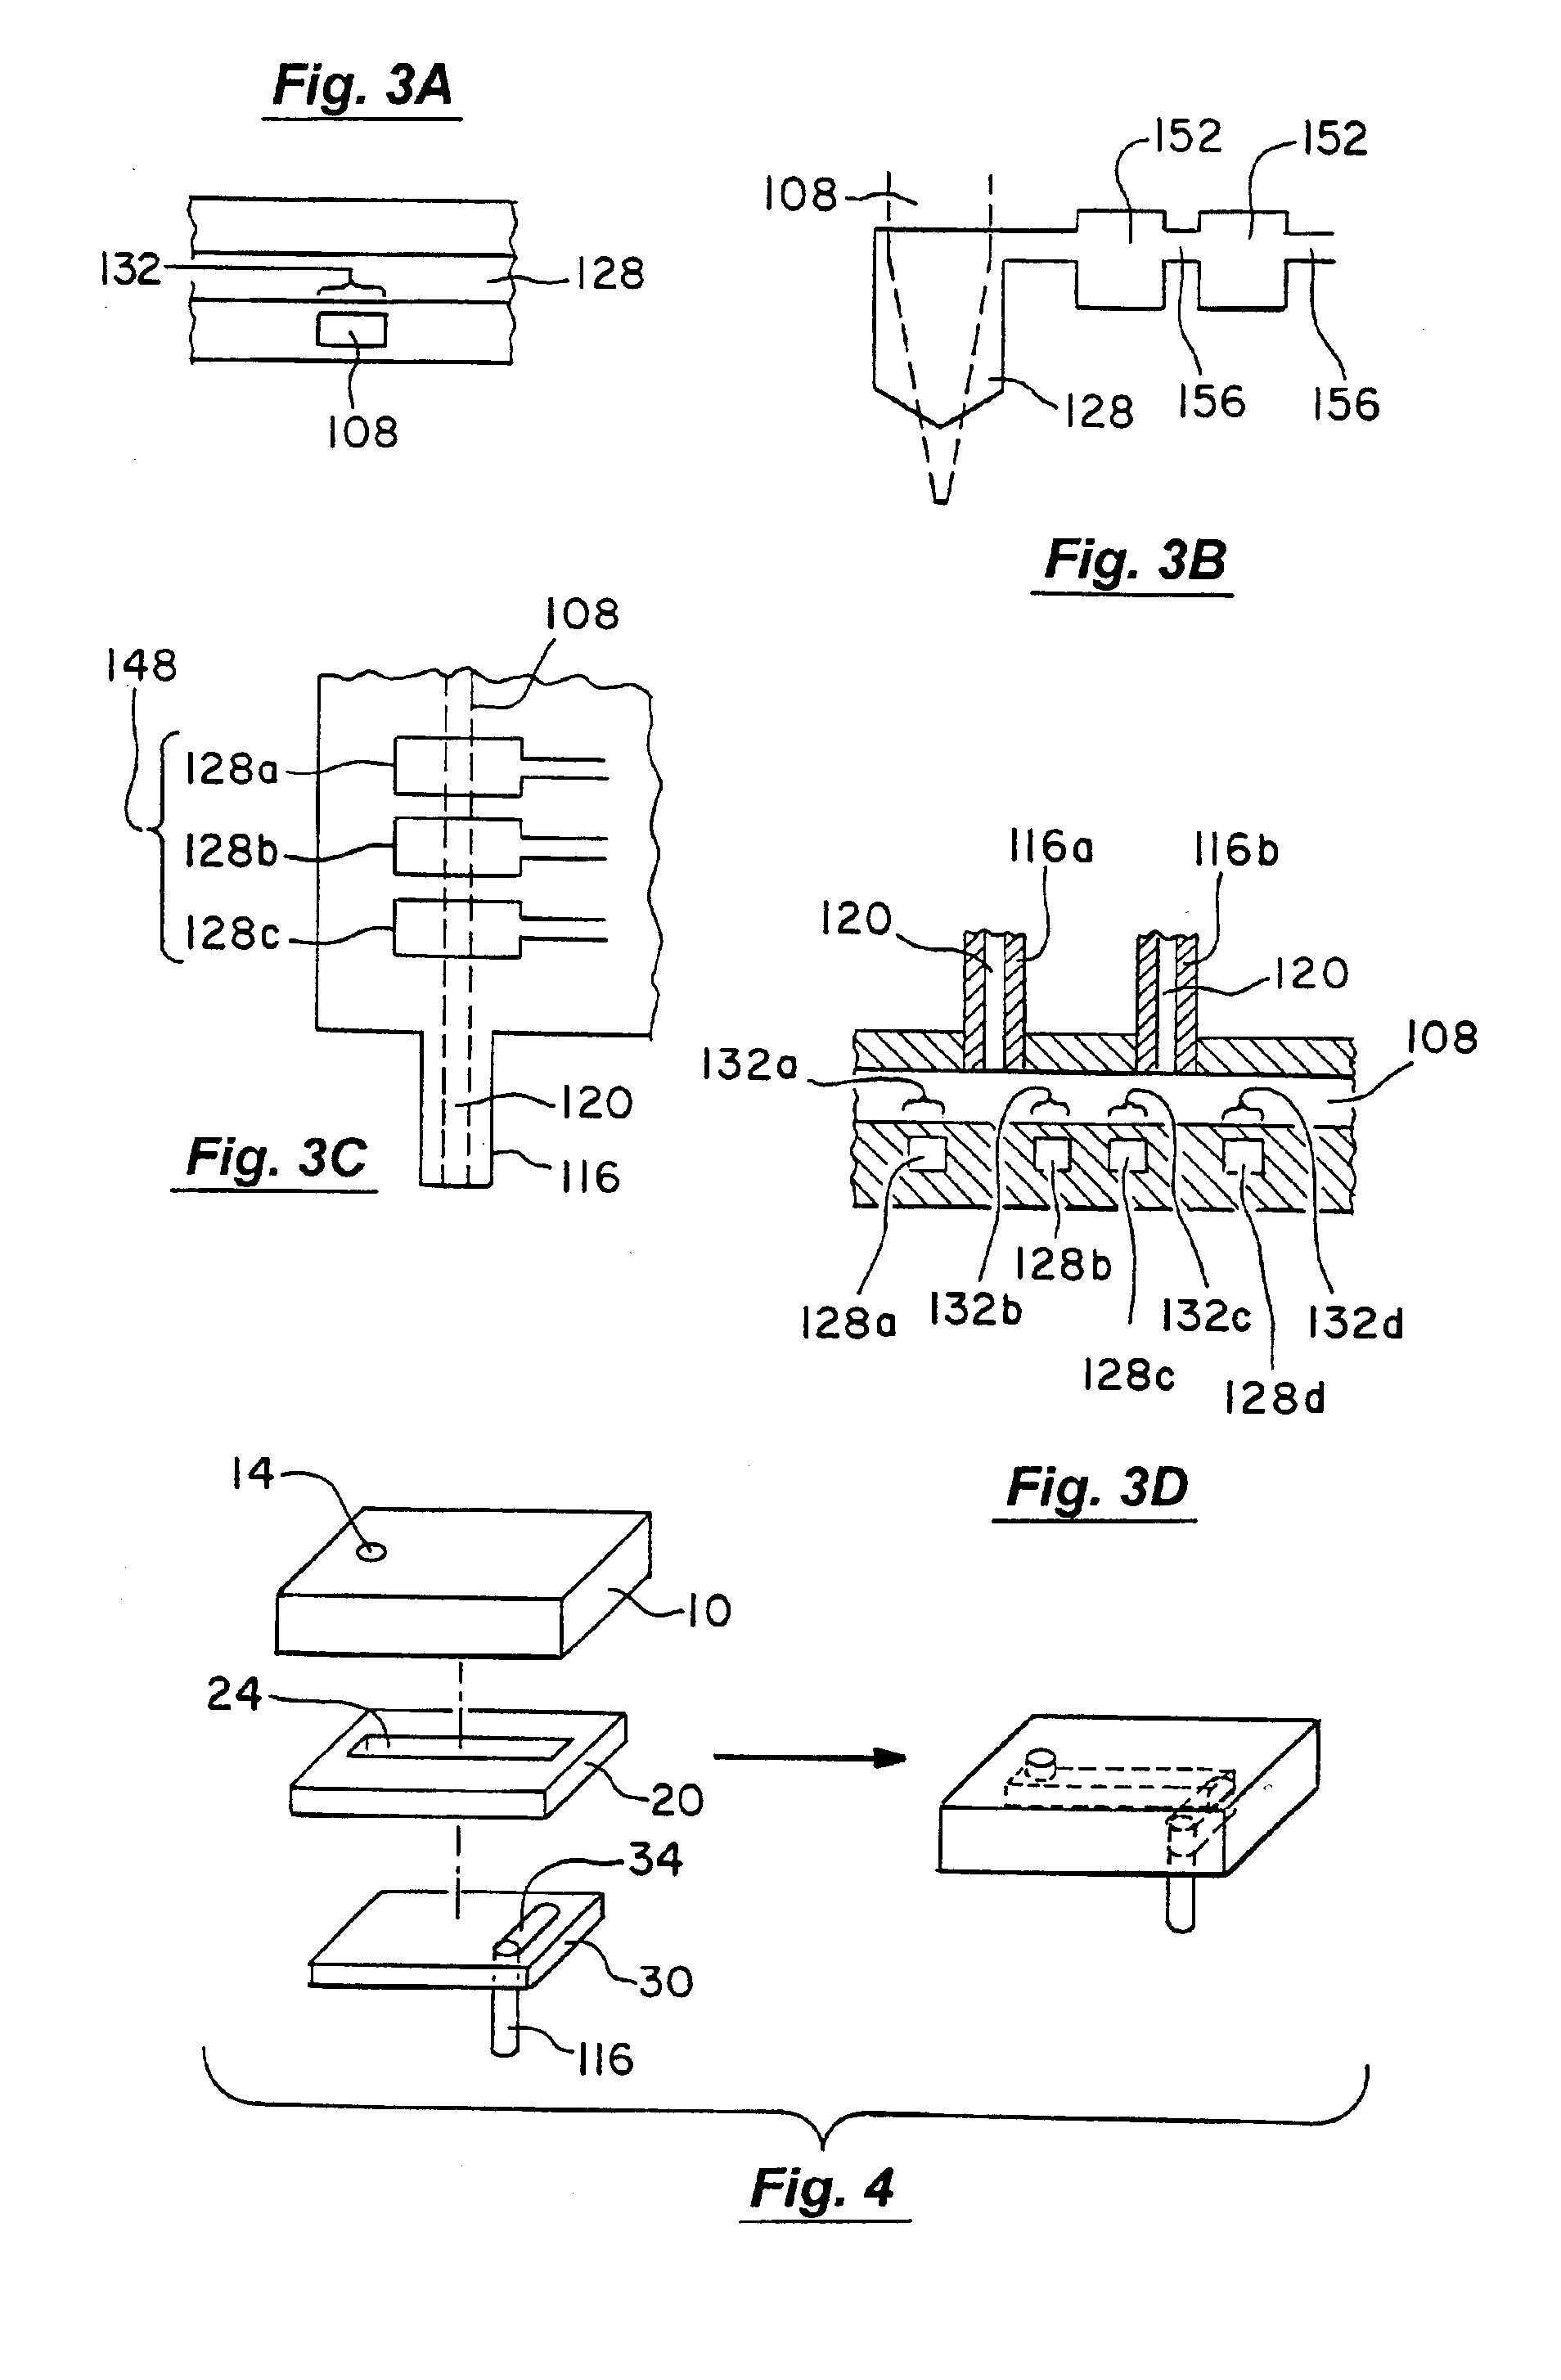 Microfluidic devices for introducing and dispensing fluids from microfluidic systems